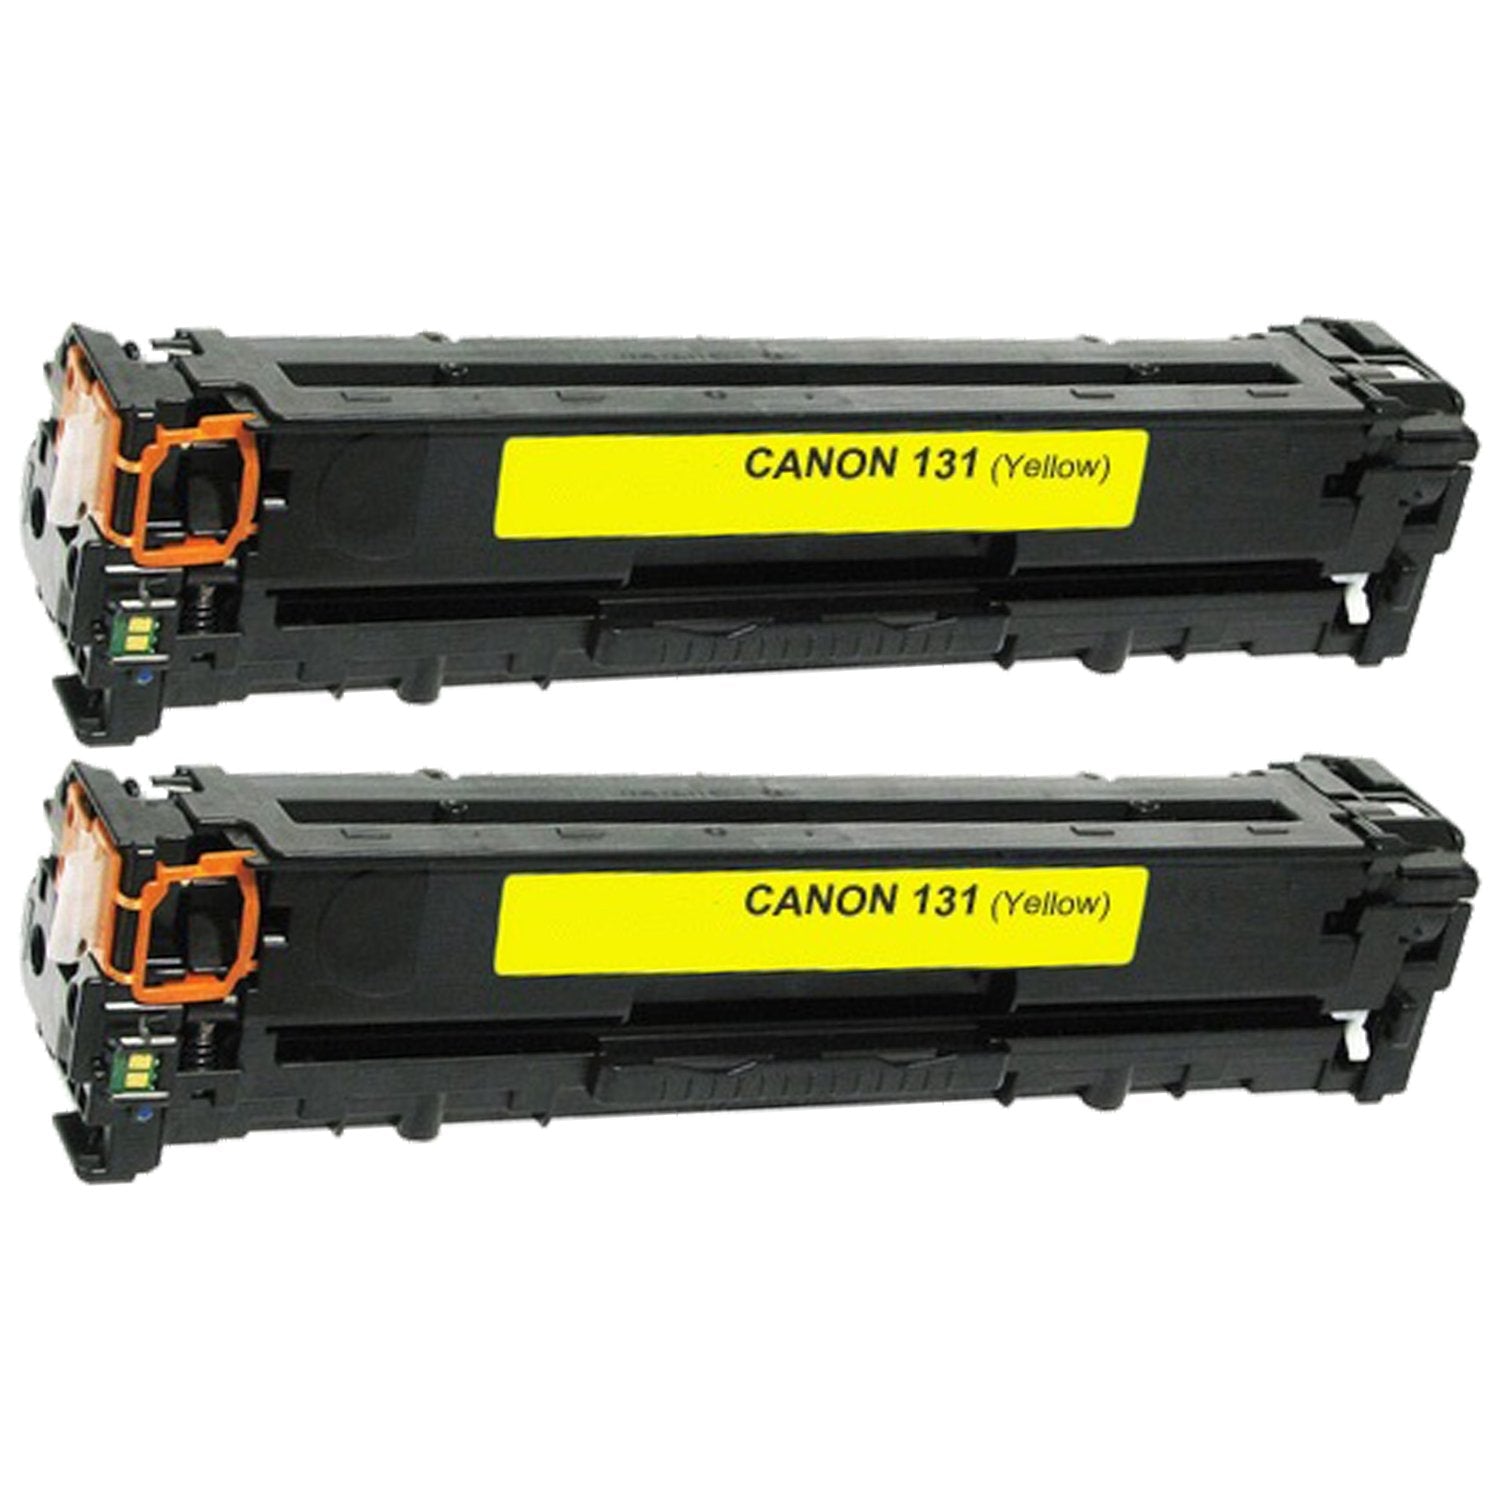 Absolute Toner Compatible Canon 131 Yellow Toner Cartridge | Absolute Toner Canon Toner Cartridges